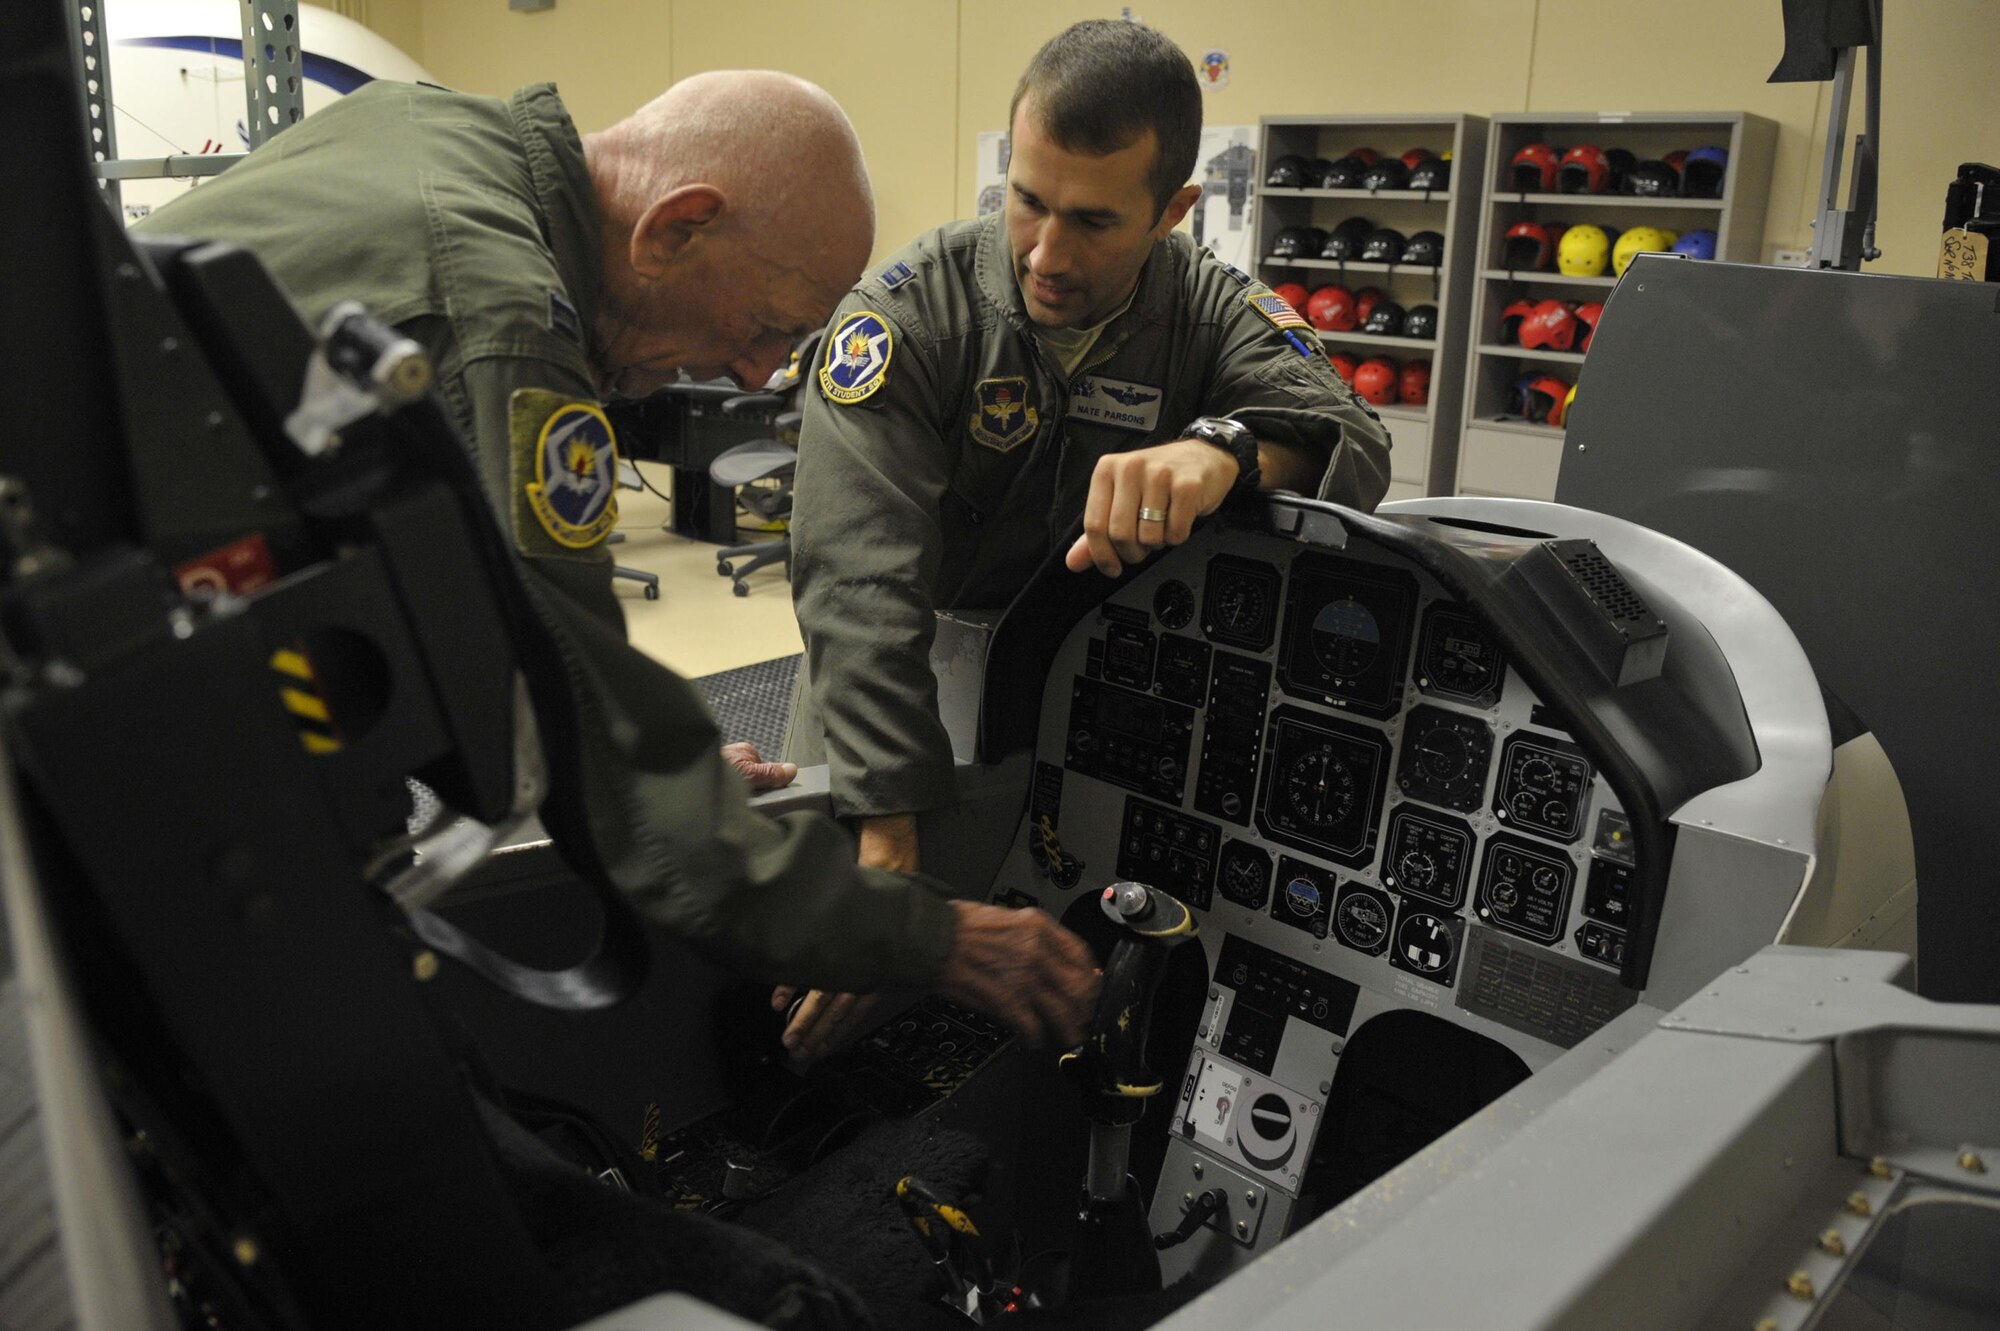 Capt. Steven Parsons, 47th Student Squadron T-6A Texan II instructor pilot, shows the T-6 trainer to retired Capt. Jerry Yellin, a former World War II U.S. Army Air Corps fighter pilot, during initial training for an orientation flight Dec. 16, 2016. After graduating from Luke Air Field as a fighter pilot in August of 1943, he spent the remainder of the war flying P-40, P- 47 Thunderbolt and P-51 Mustang combat missions in the Pacific with the 78th Fighter Squadron, known as the "Bushmasters." (U.S. Air Force photo/Tech. Sgt. Mike Meares)